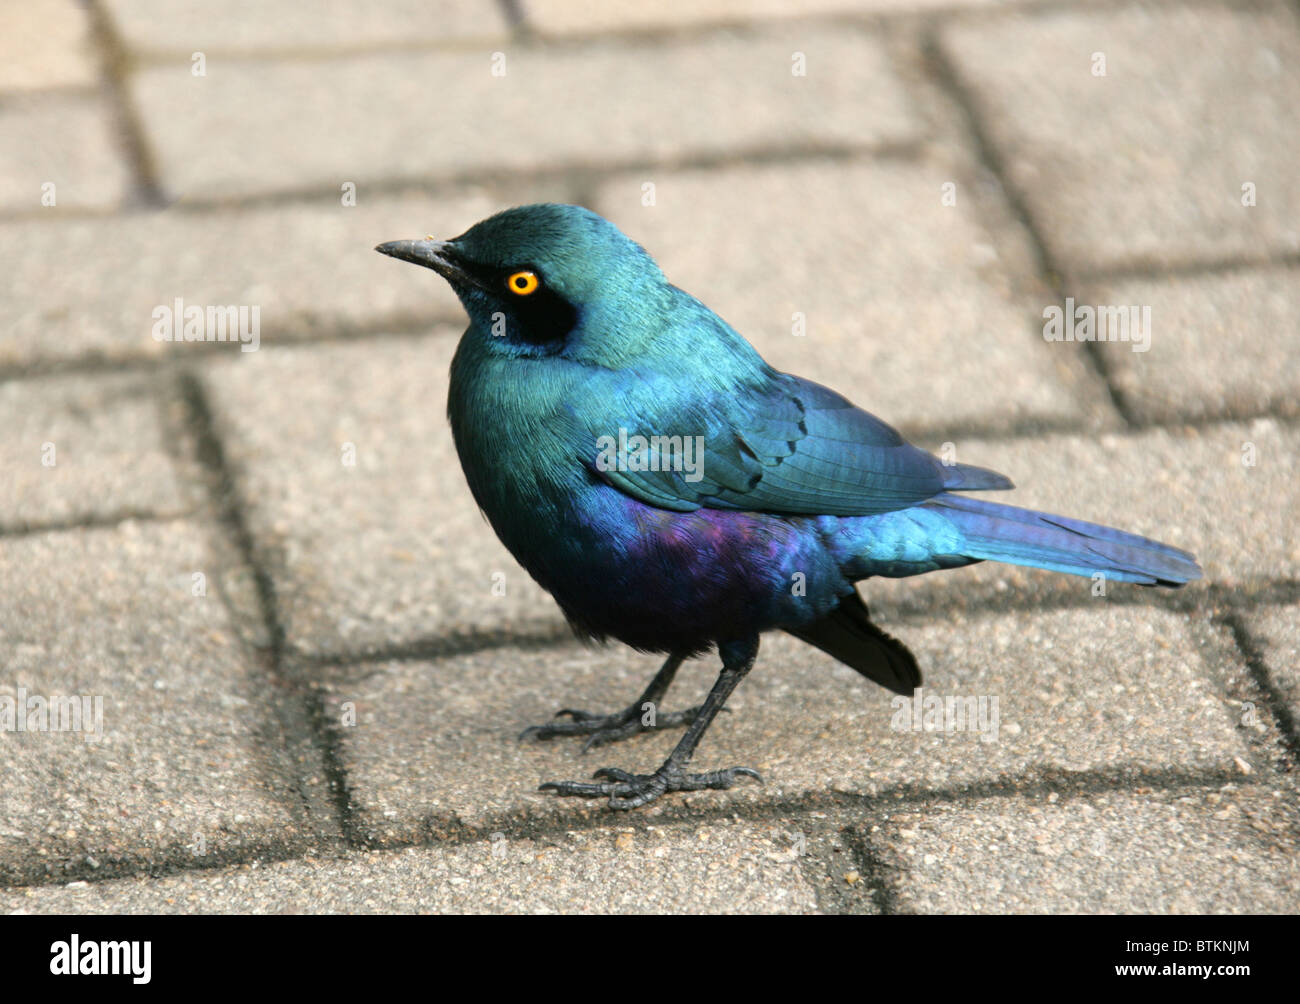 Cape Glossy Starling, Lamprotornis nitens, Sturnidae, Afrique du Sud Banque D'Images